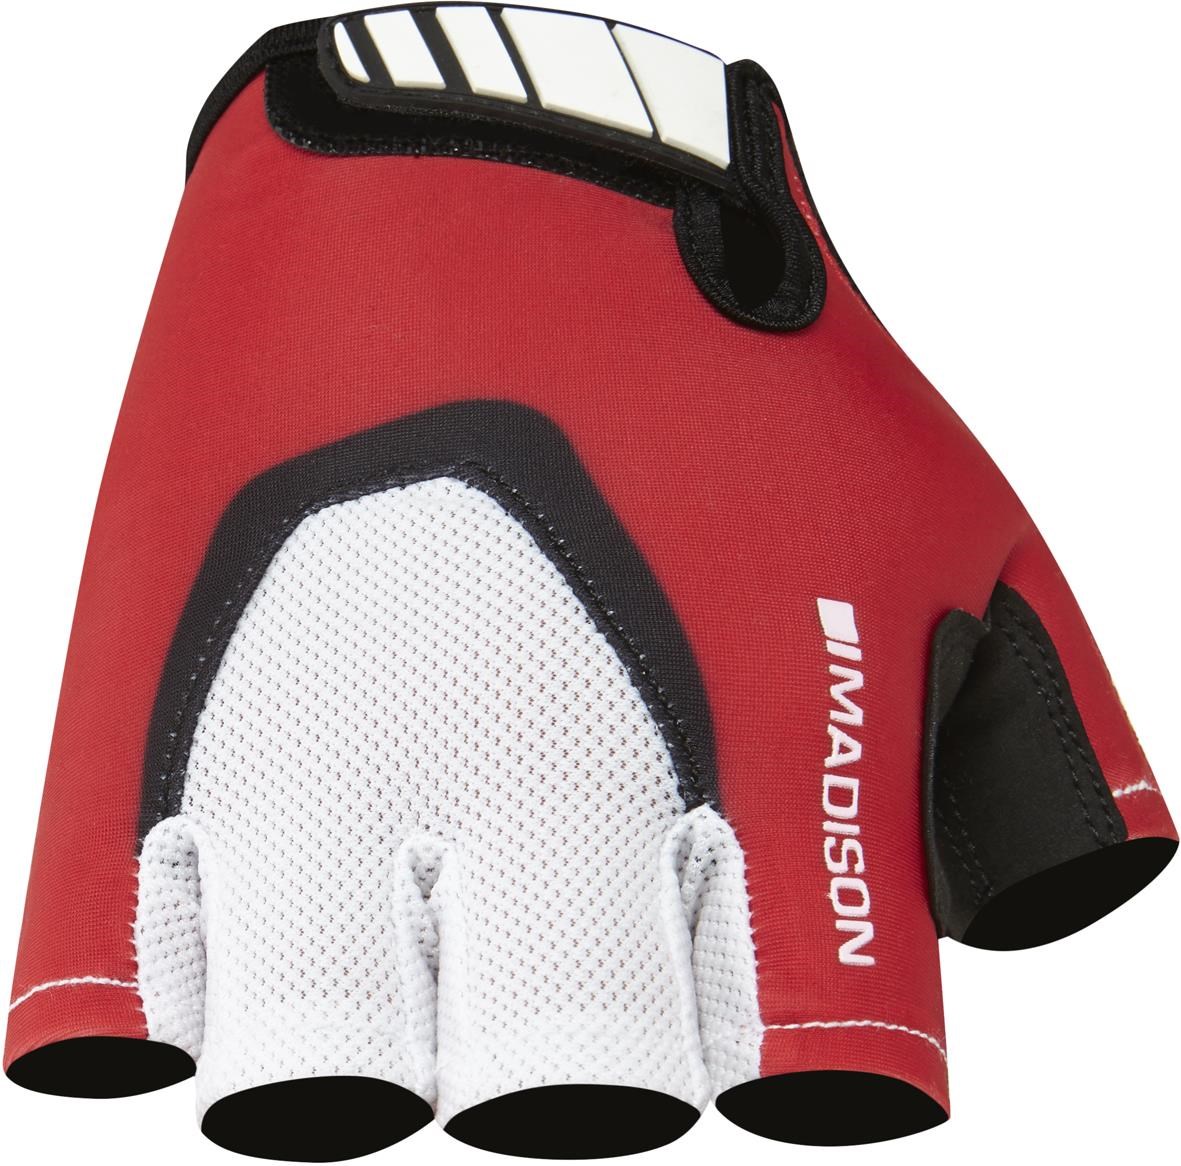 Madison Sportive Mitts Short Finger Gloves product image